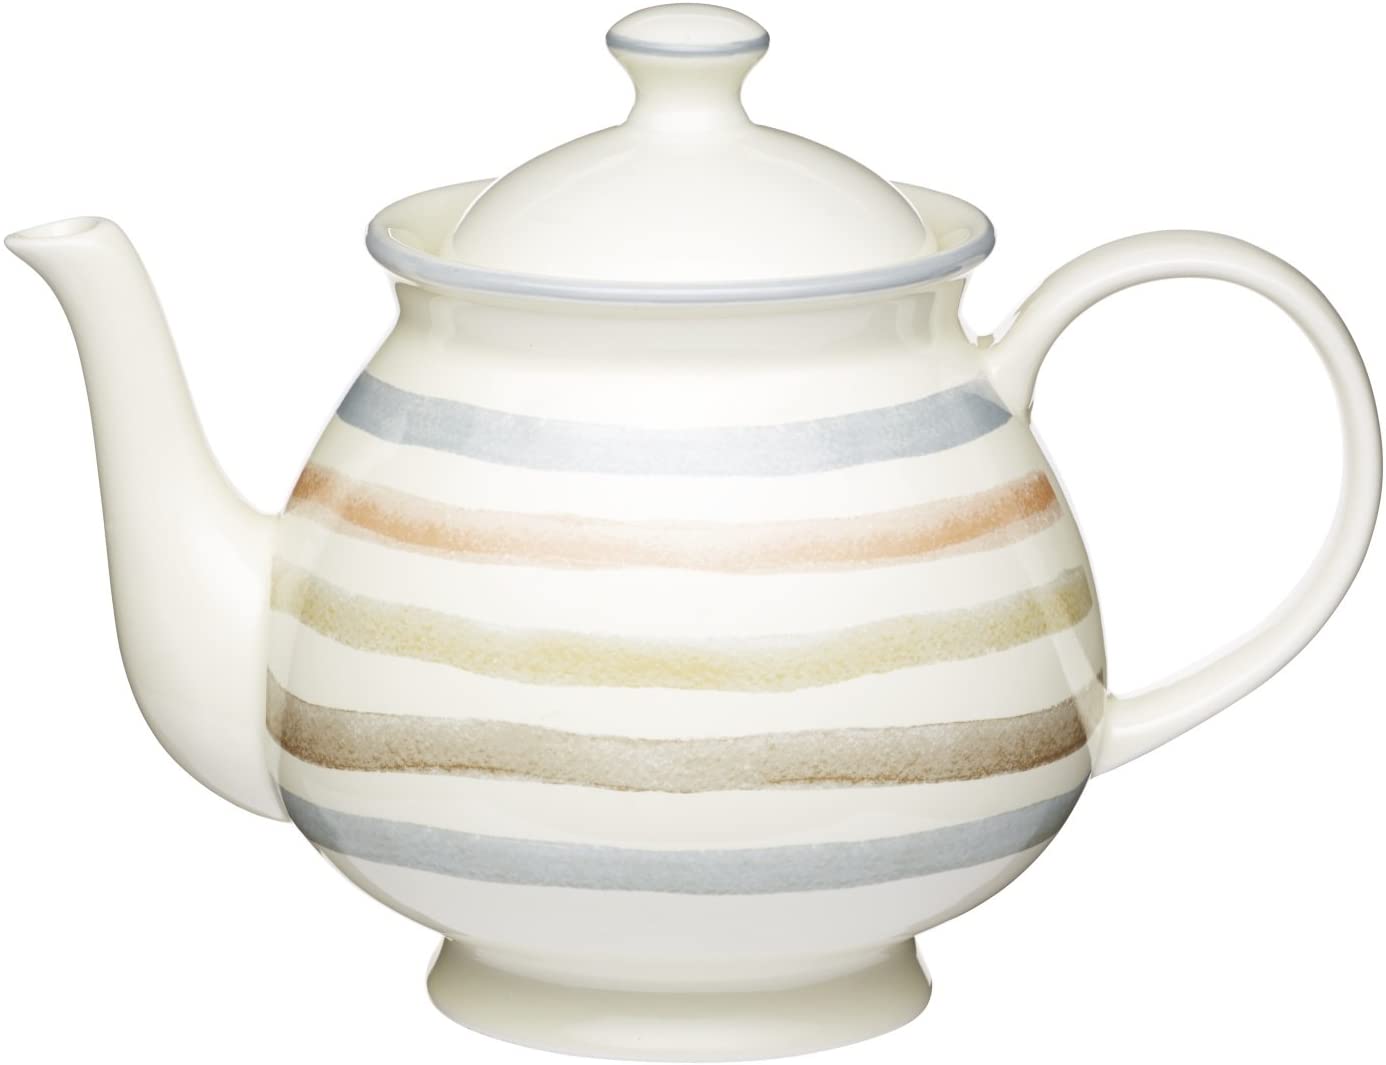 THE CLASSIC COLLECTION Teapot Classic 1400 ml in White Porcelain 12 x 17 x 22 cm